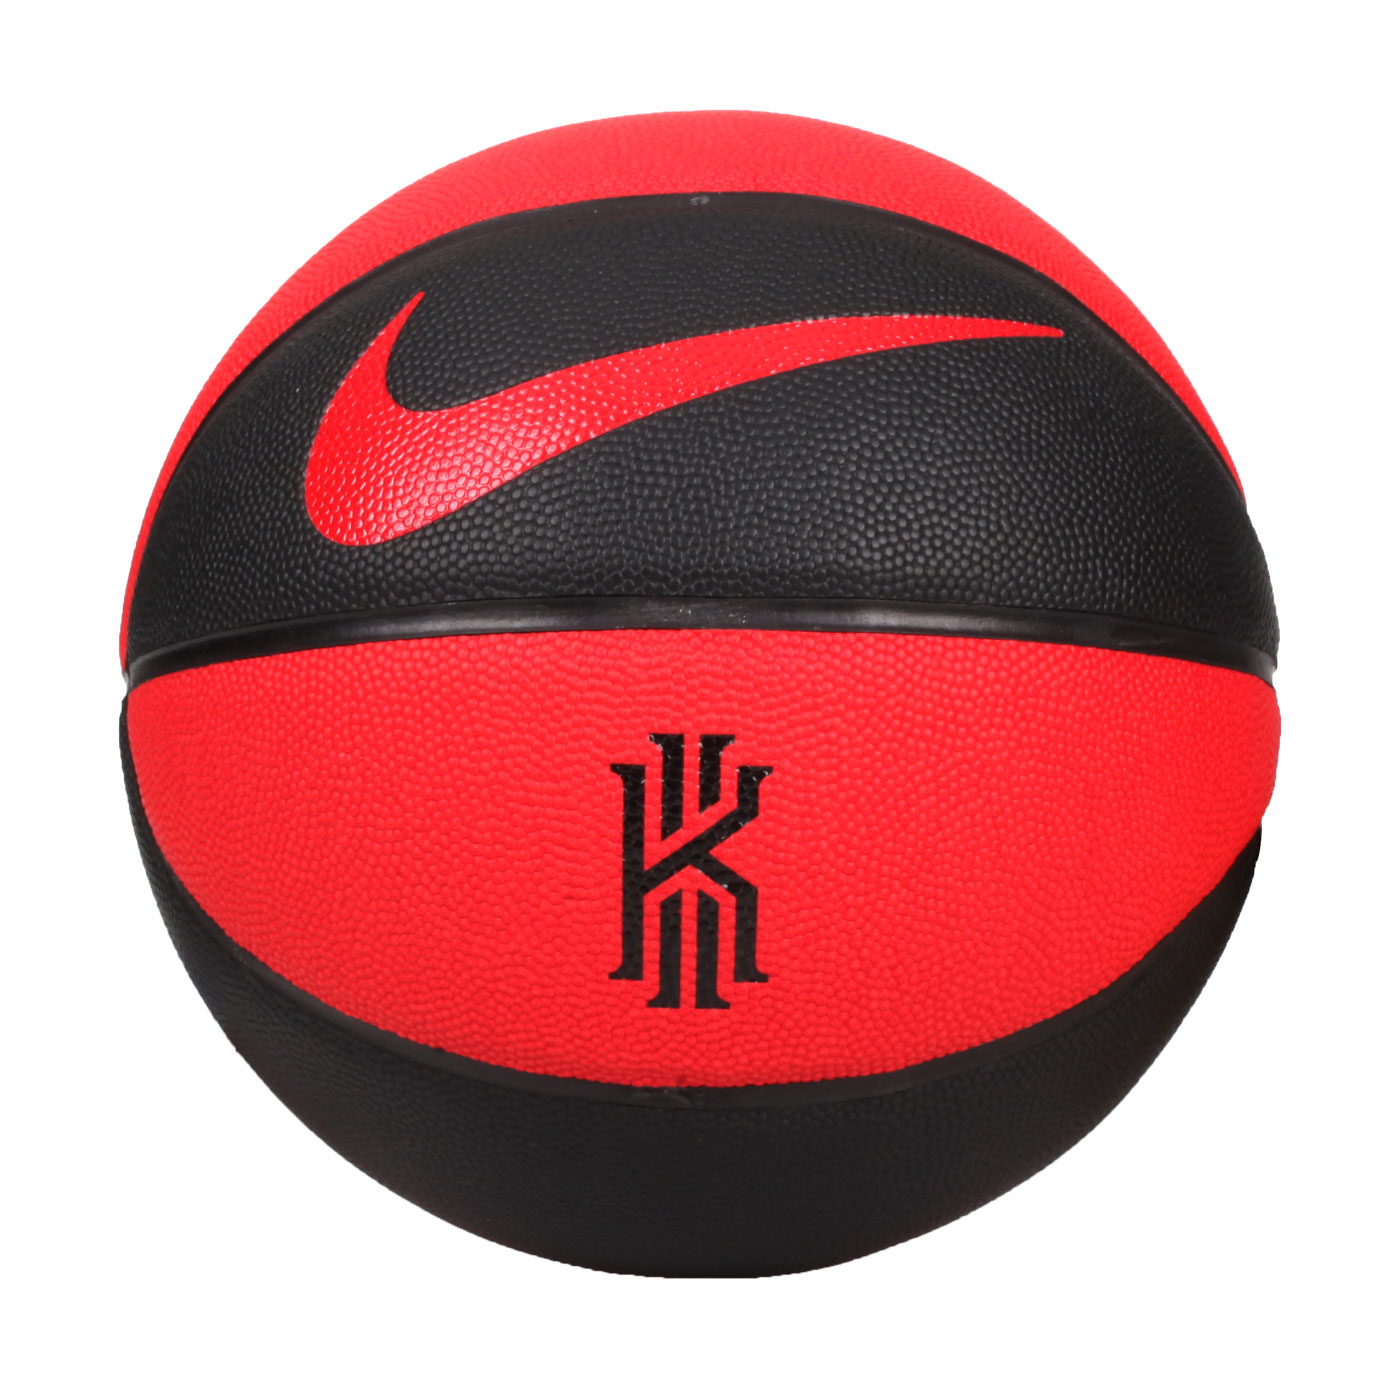 NIKE KYRIE CROSSOVER 7號球 N100303707407